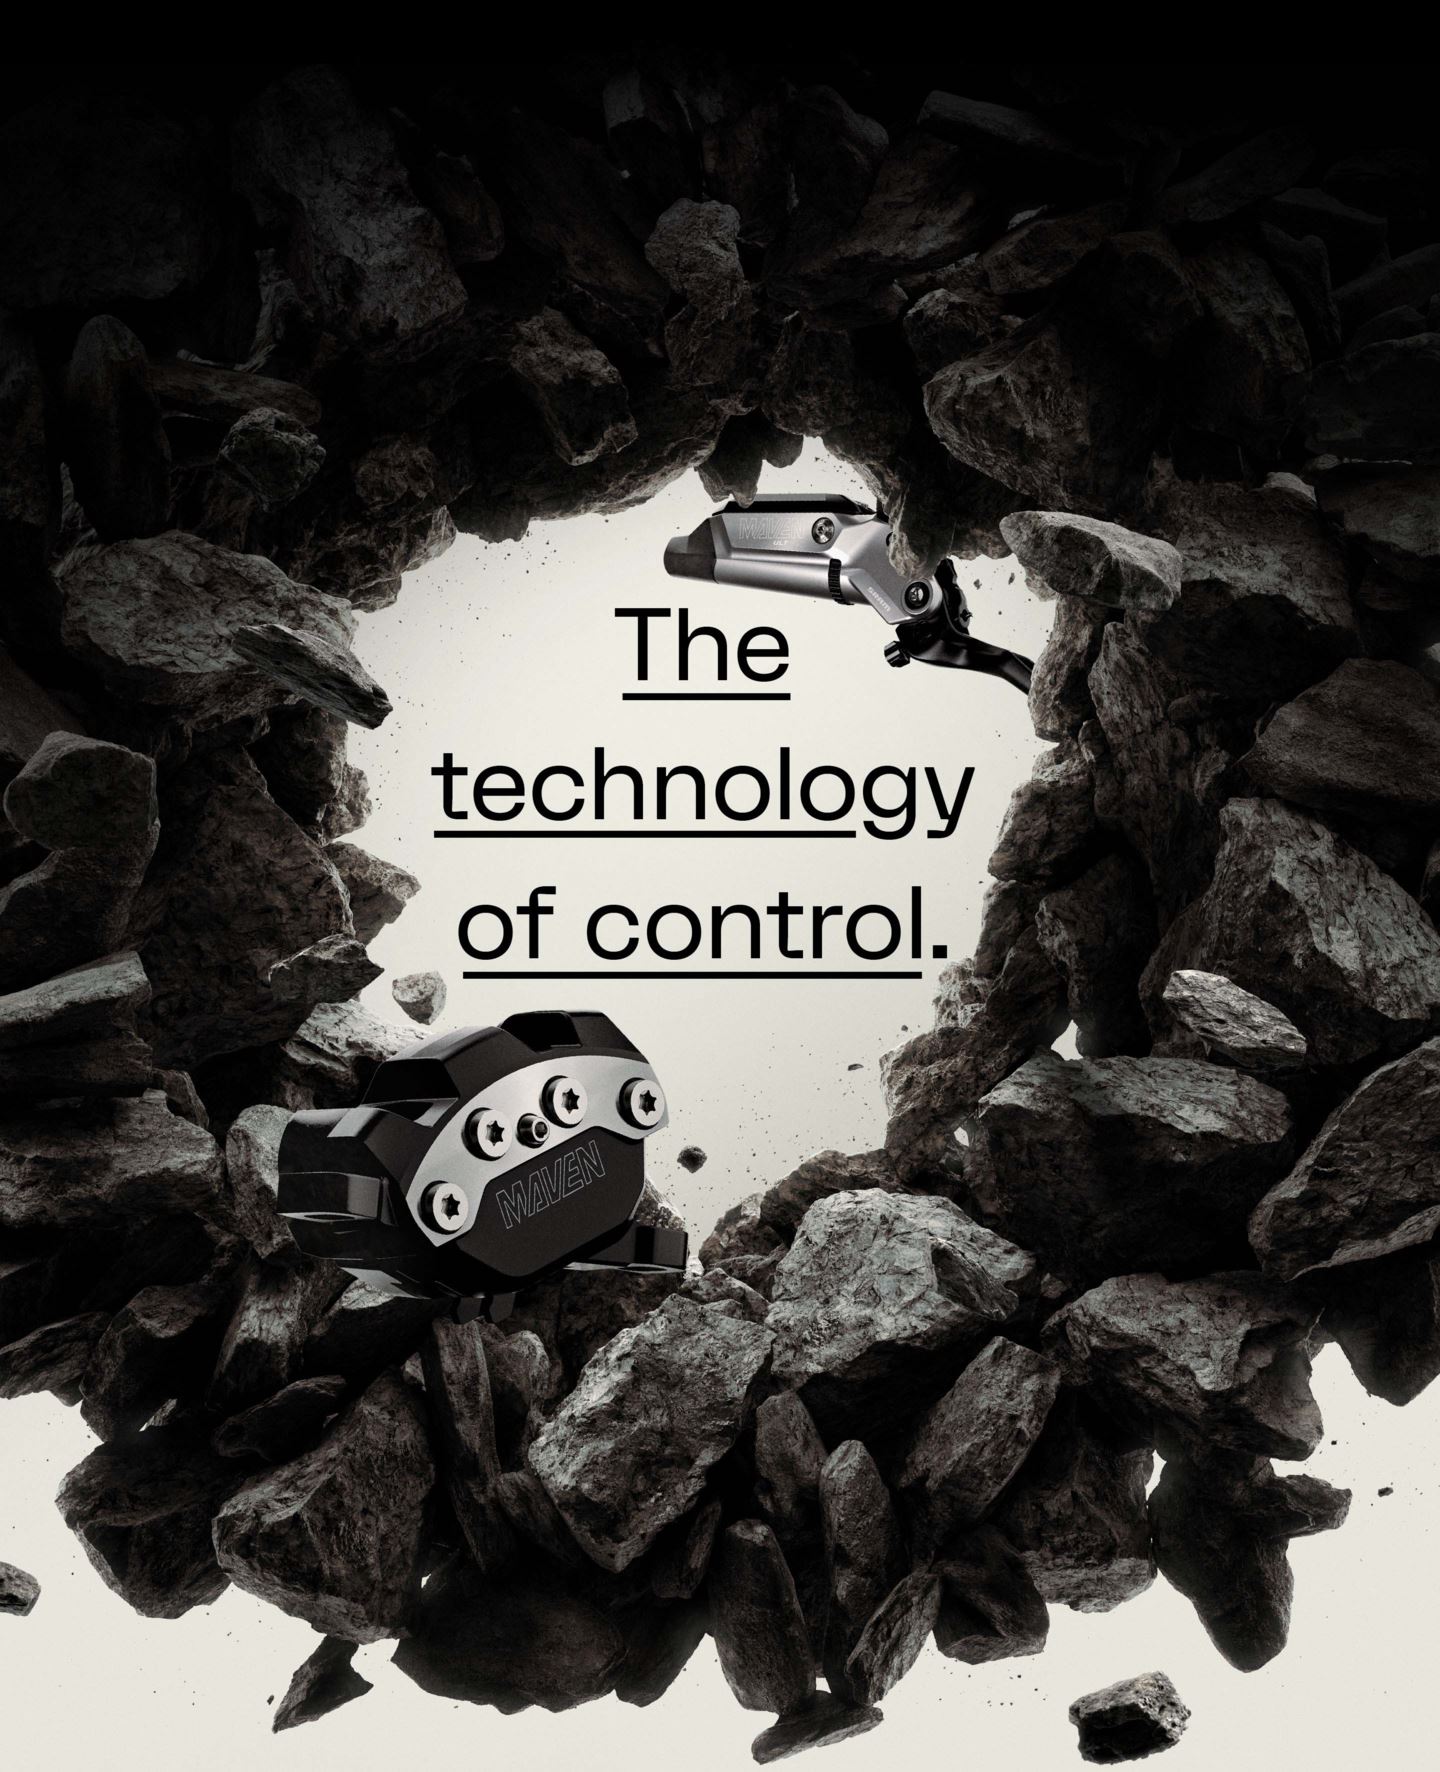 The technology of control.